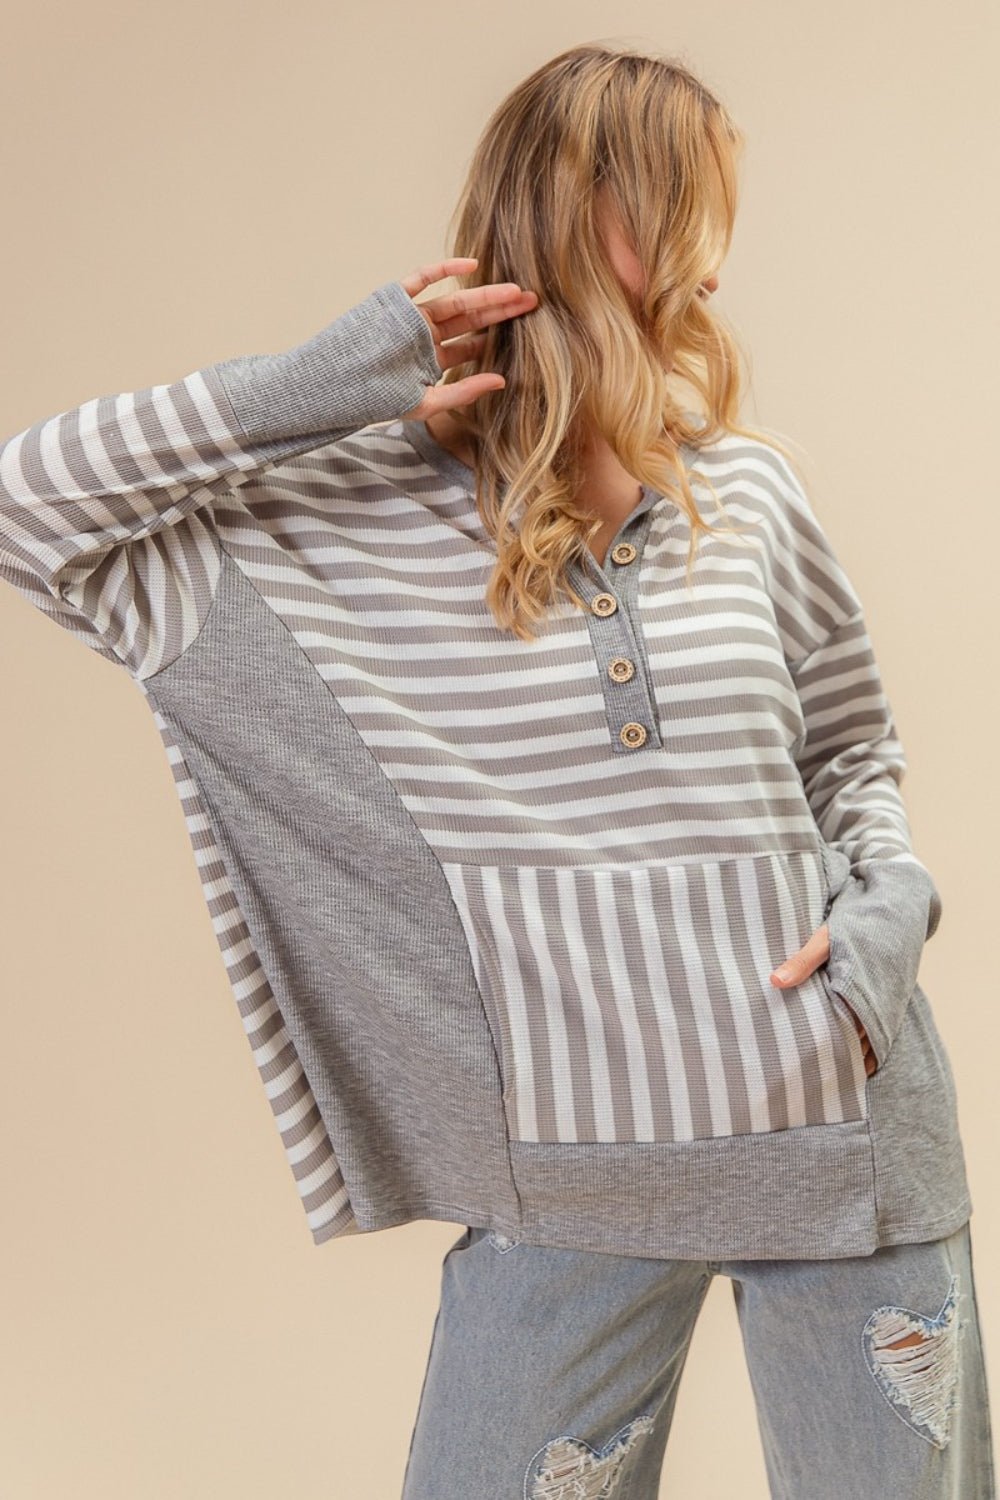 BiBi Striped Thumbhole Long Sleeve Top - Happily Ever Atchison Shop Co.